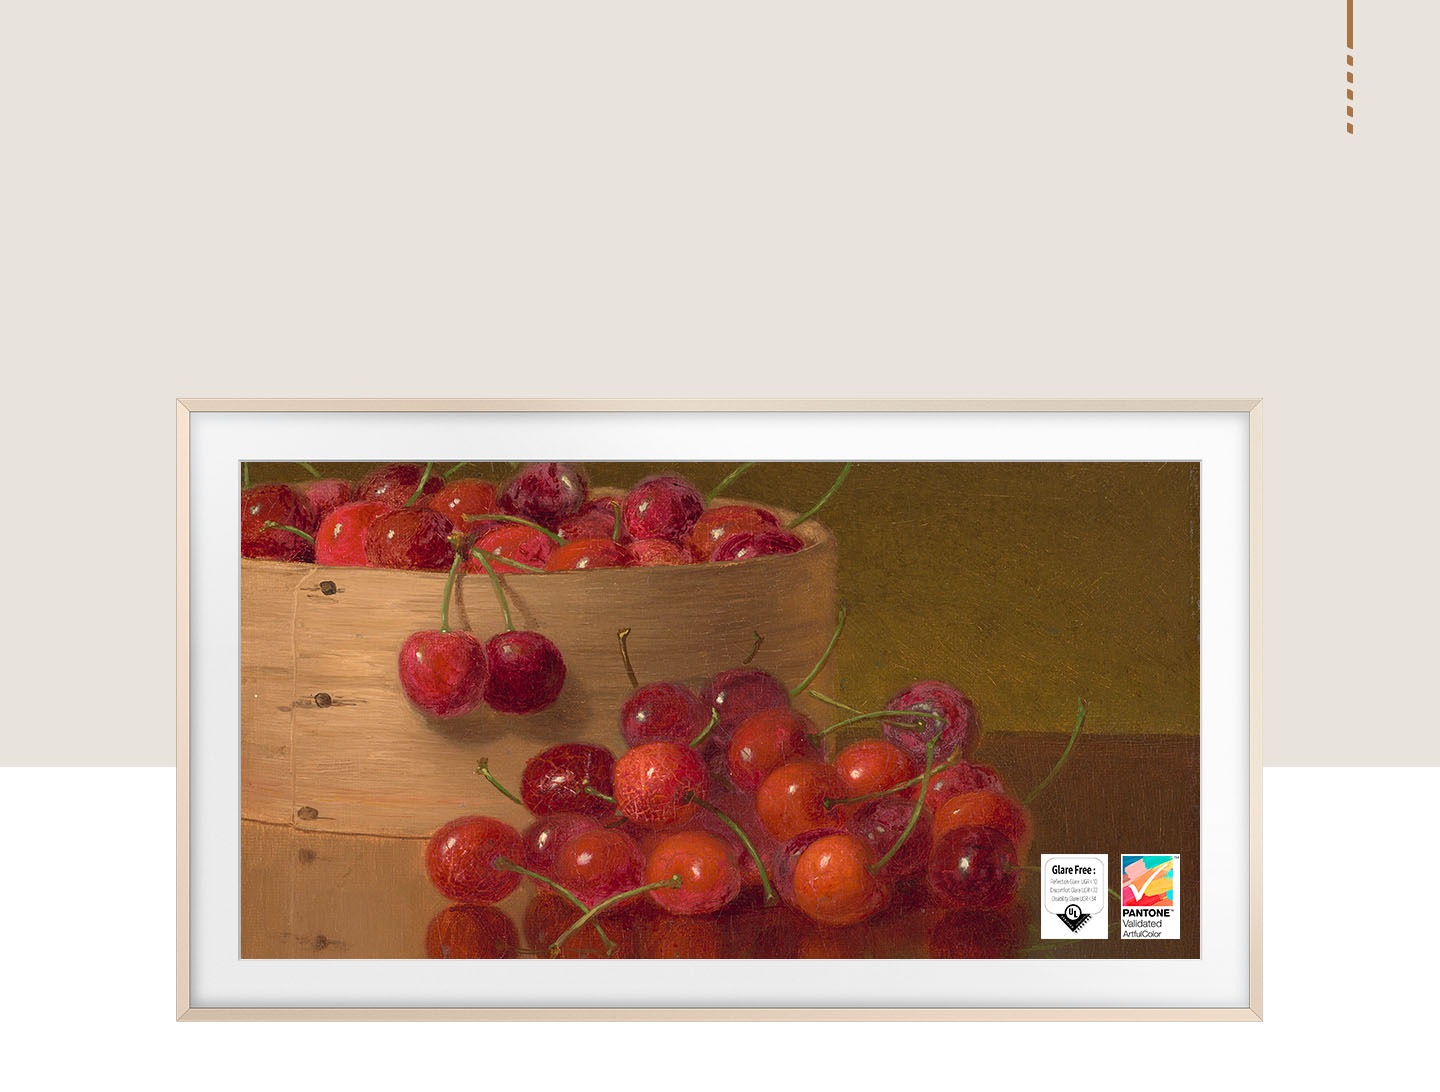 The Frame TV shows a painting of cherries with the PANTONE Validated certification stamp and a glare-free certified logo that Reflection Glare UGR < 10 Discomfort Glare UGR < 22 Disability Glare UGR < 34 is on the lower right side.